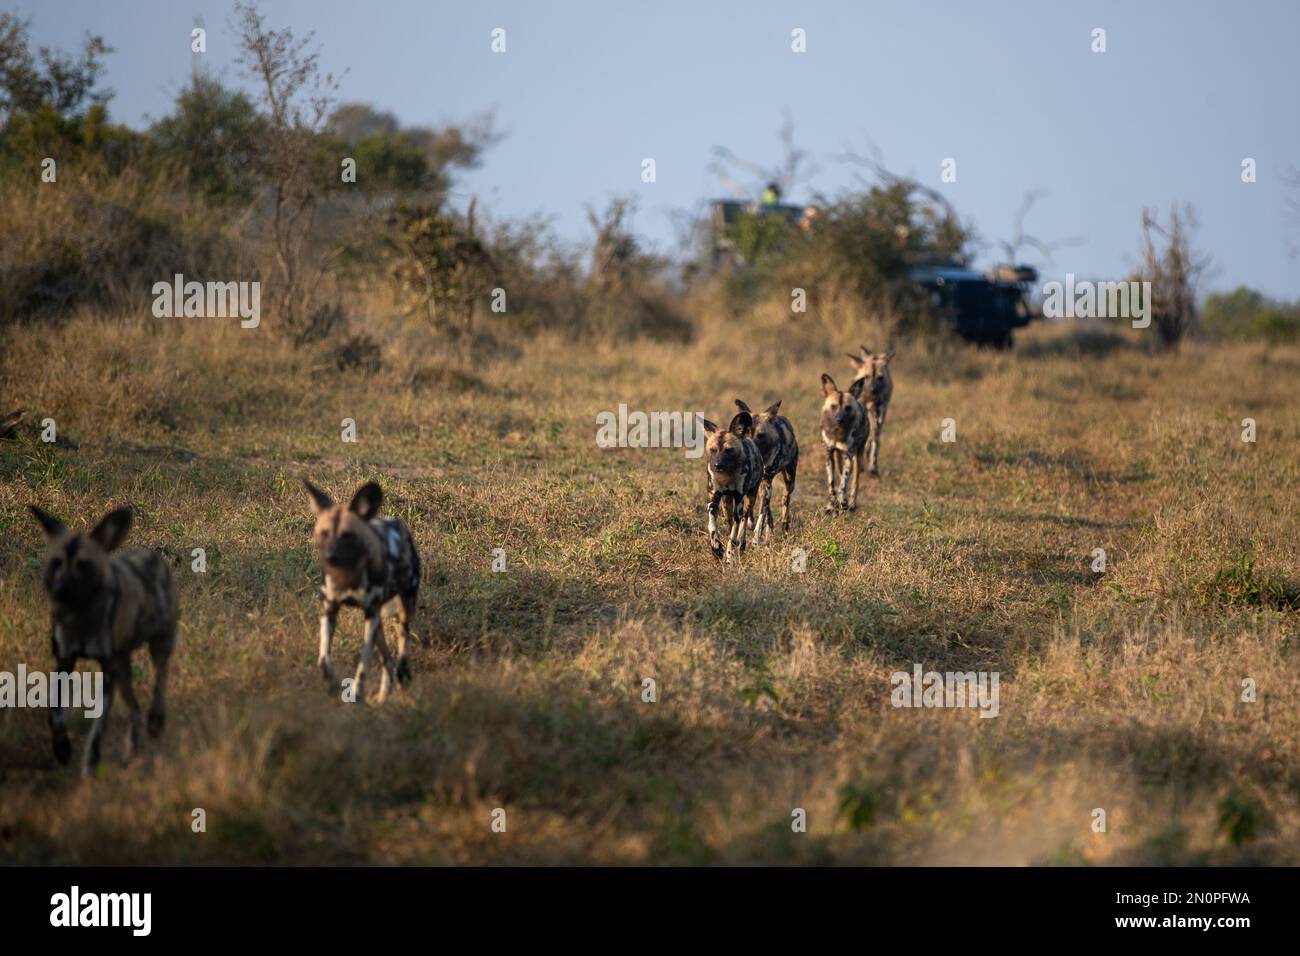 A pack of wild dogs, Lycaon pictus, run together through the grass. Stock Photo